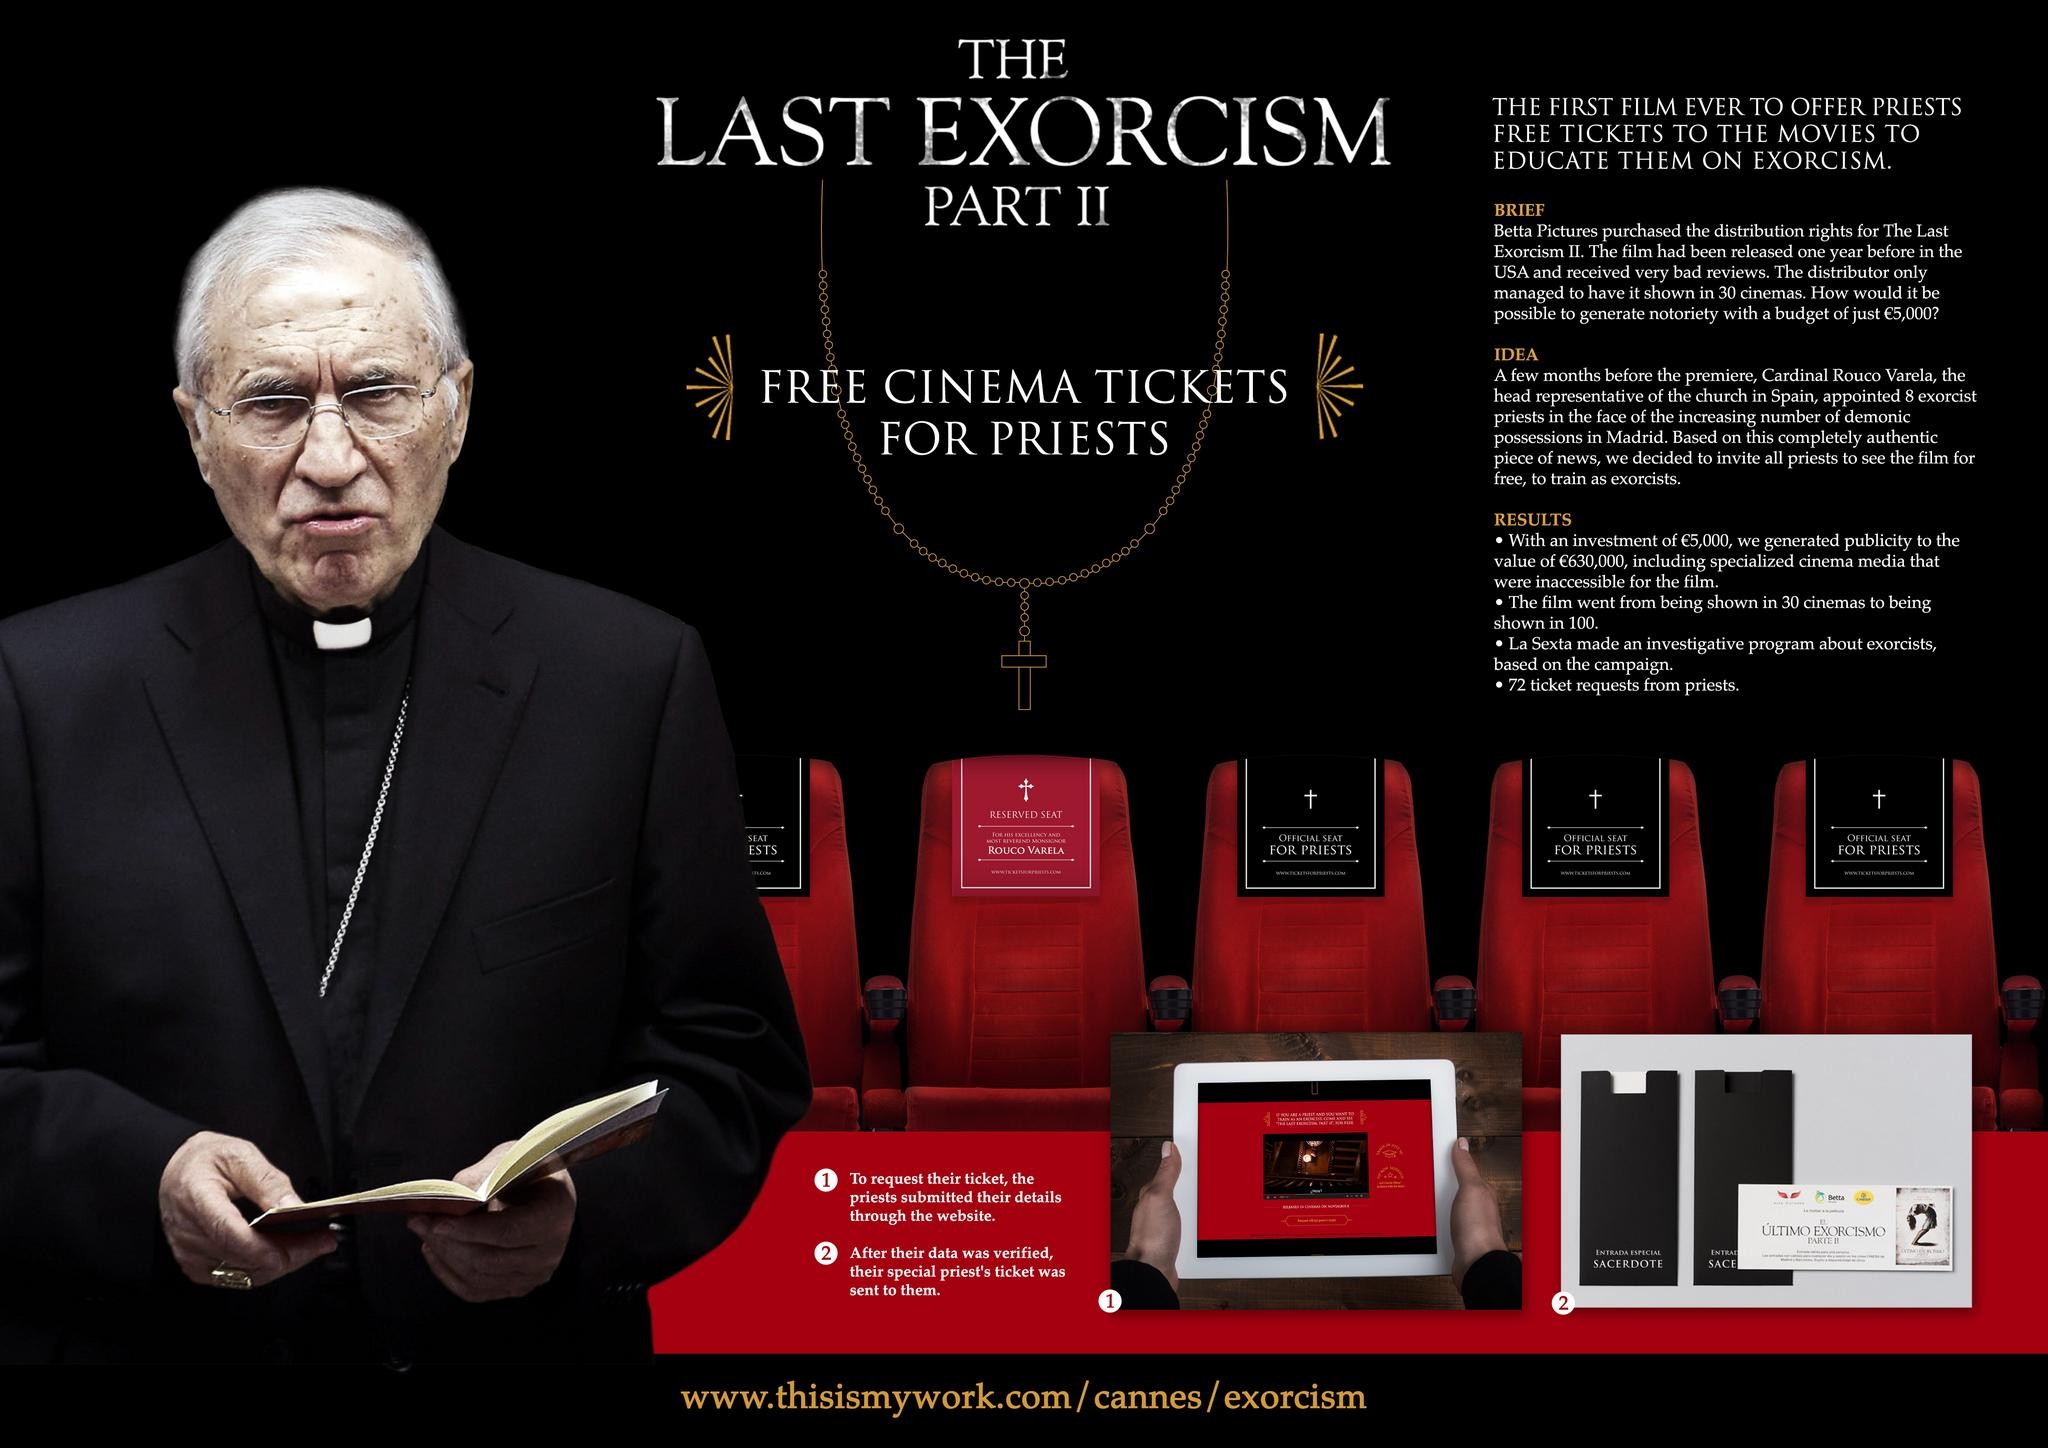 TICKETS FOR PRIESTS